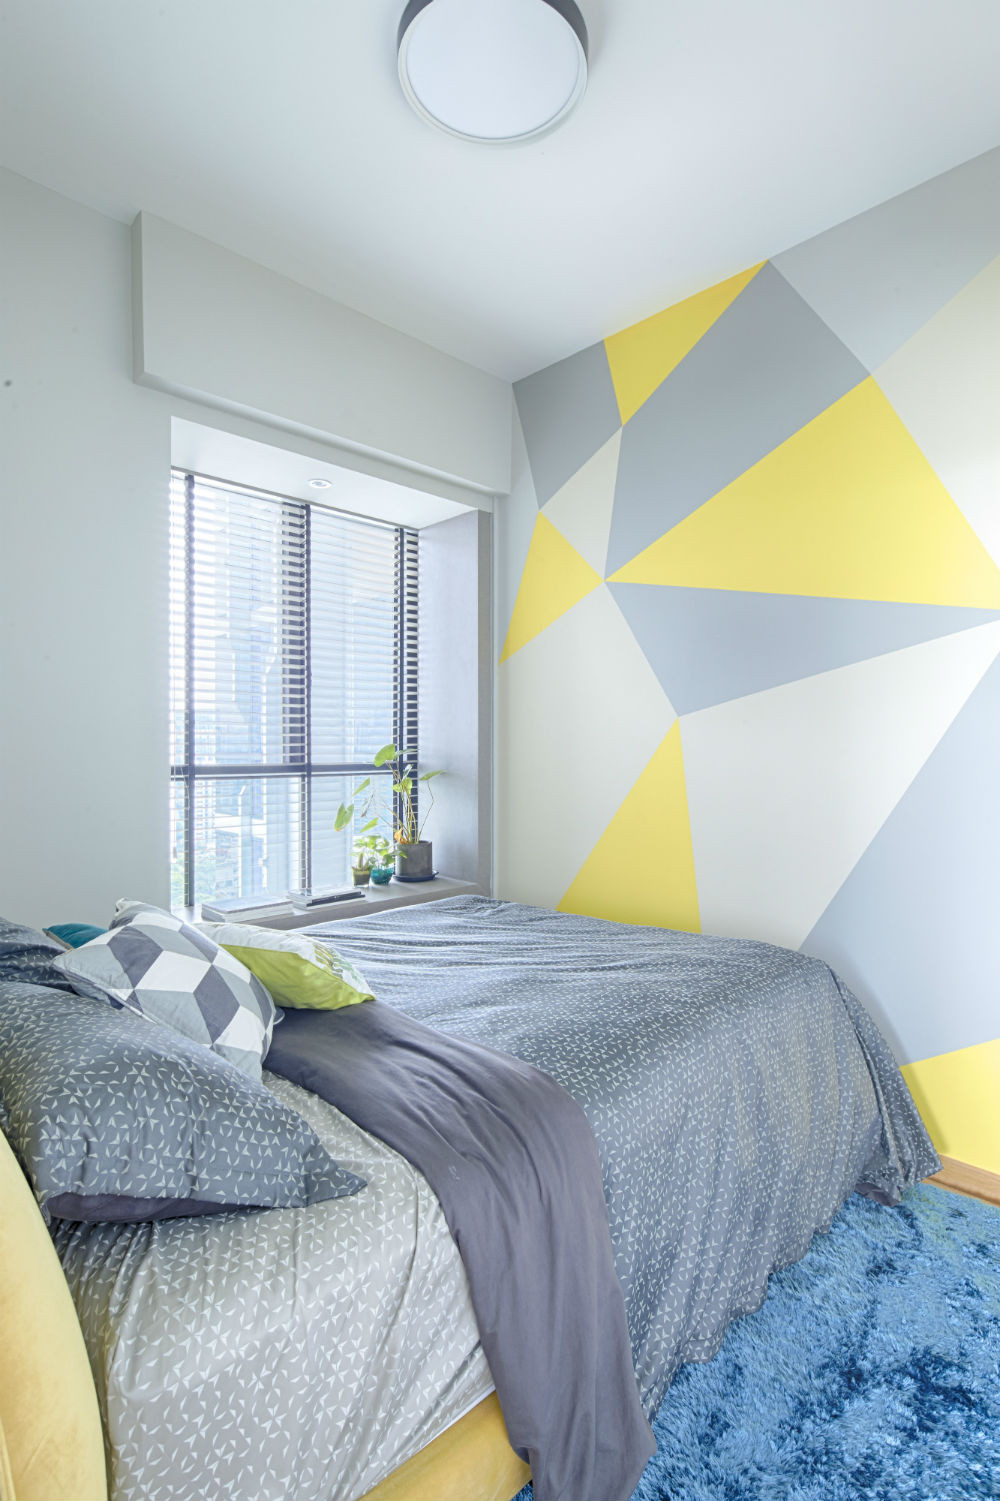 Painting For Bedroom Wall
 A great DIY paint idea for your walls